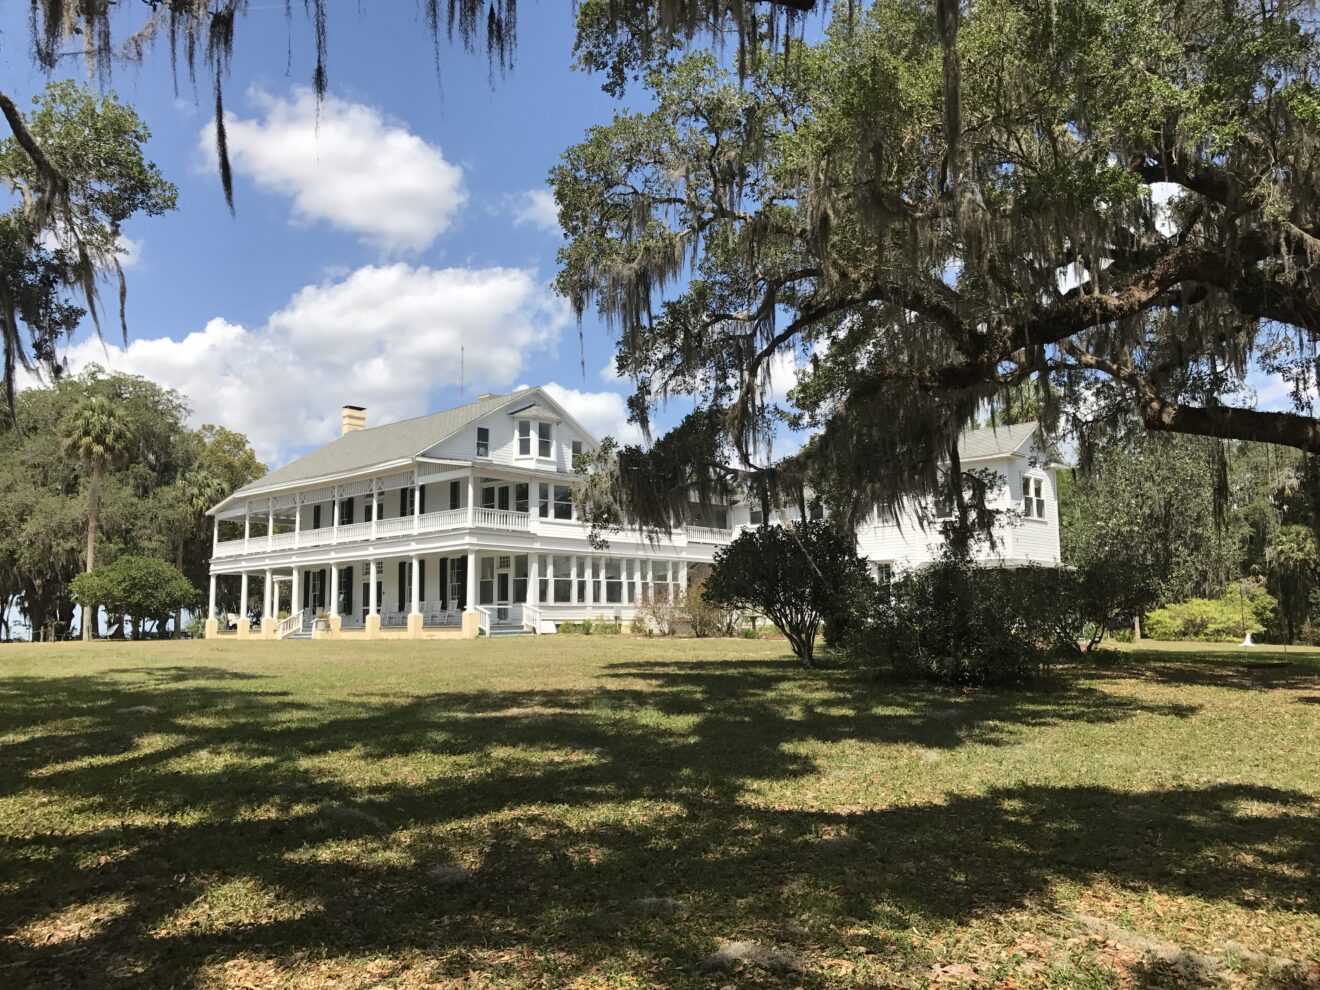 Changes at Chinsegut include continuing Historic Manor House Tours